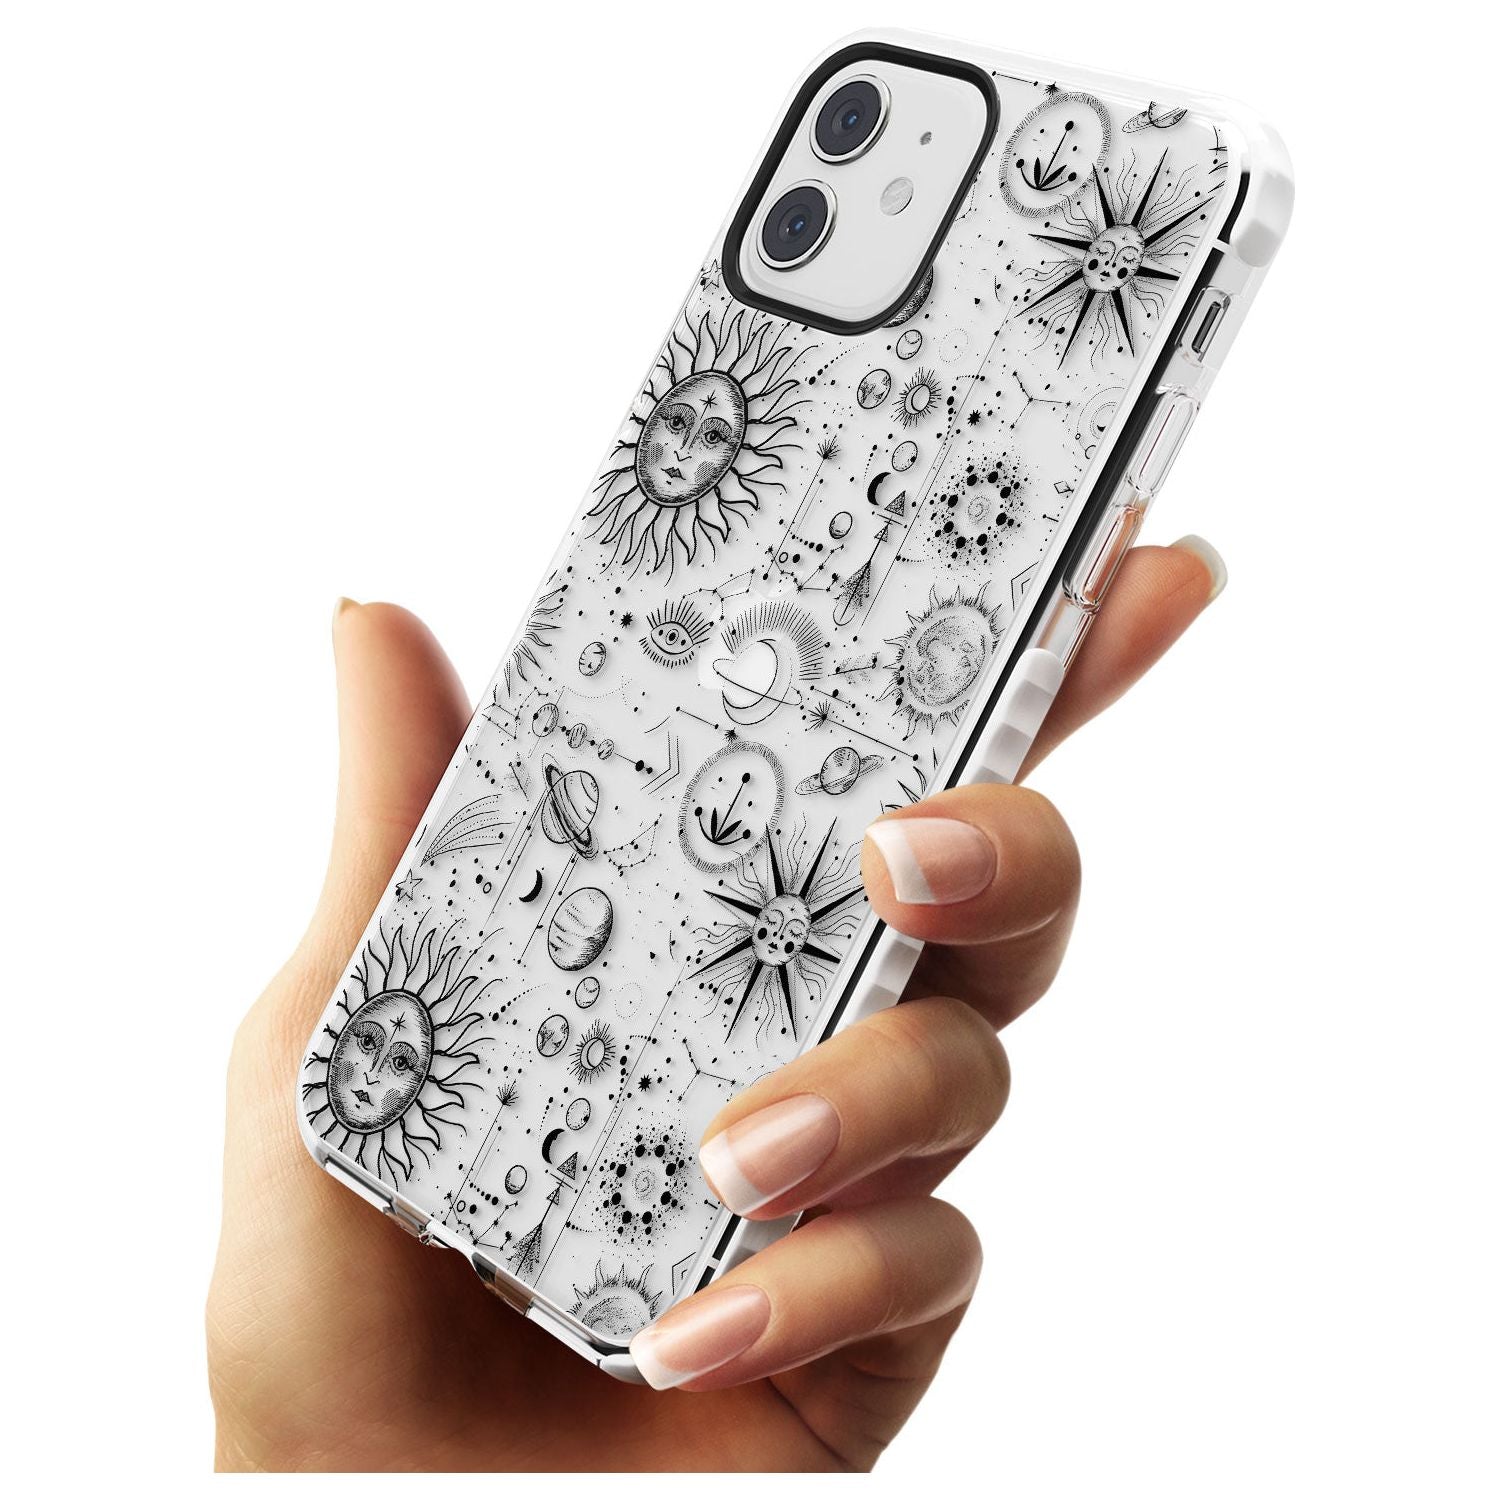 Suns & Planets Astrological Impact Phone Case for iPhone 11